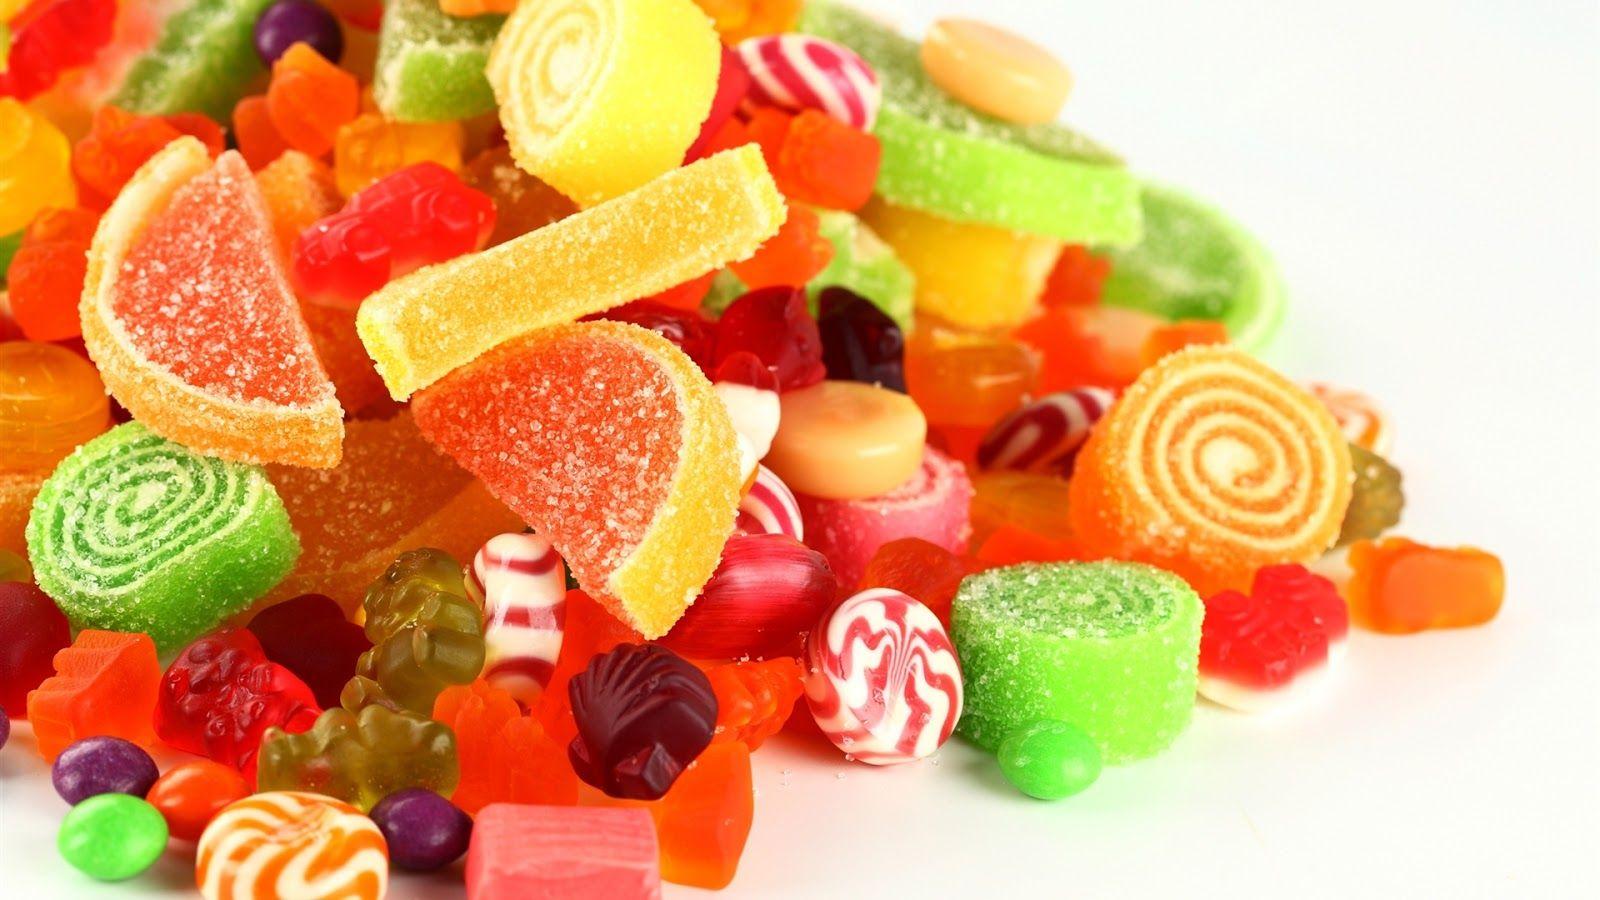 You can download Fruit Candy HD Wallpaper here. Fruit Candy HD